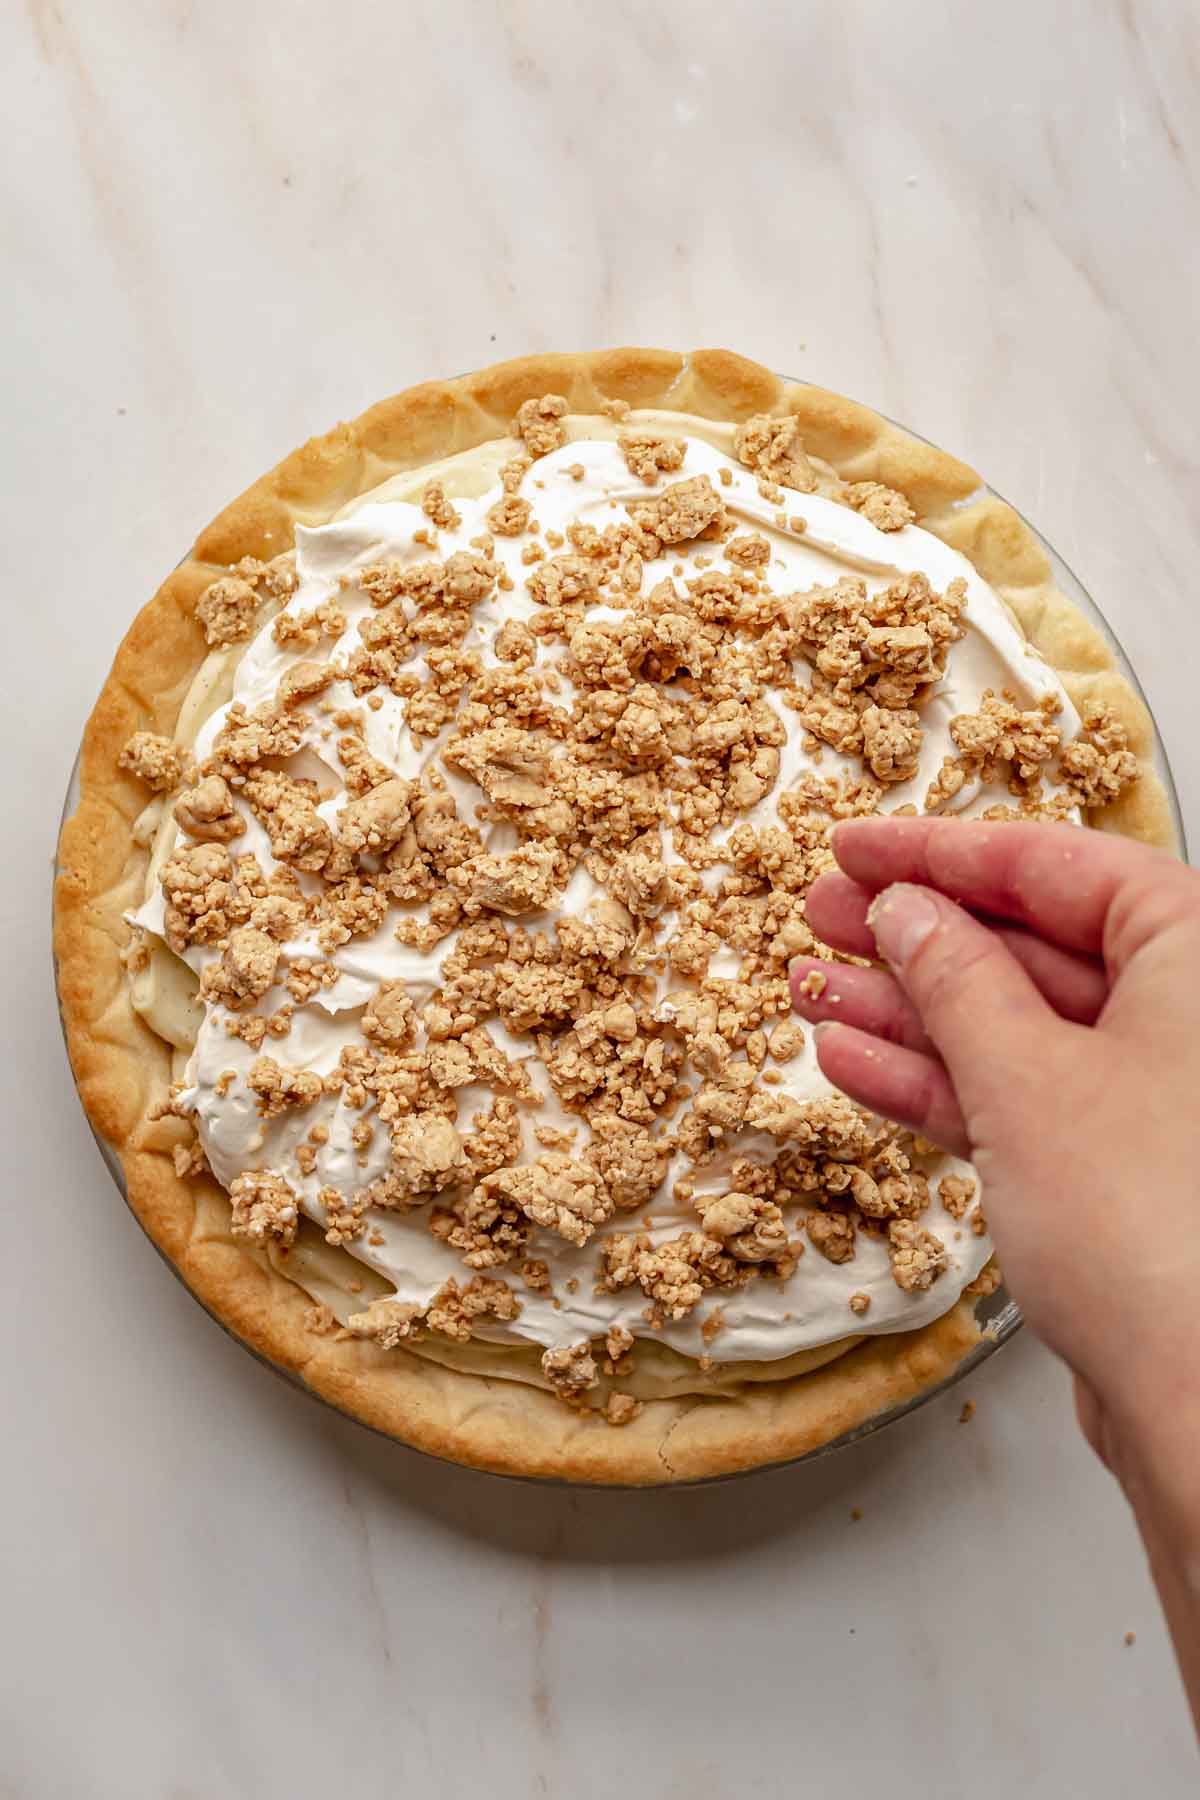 A hand sprinkles peanut butter crumbles top of whipped cream.